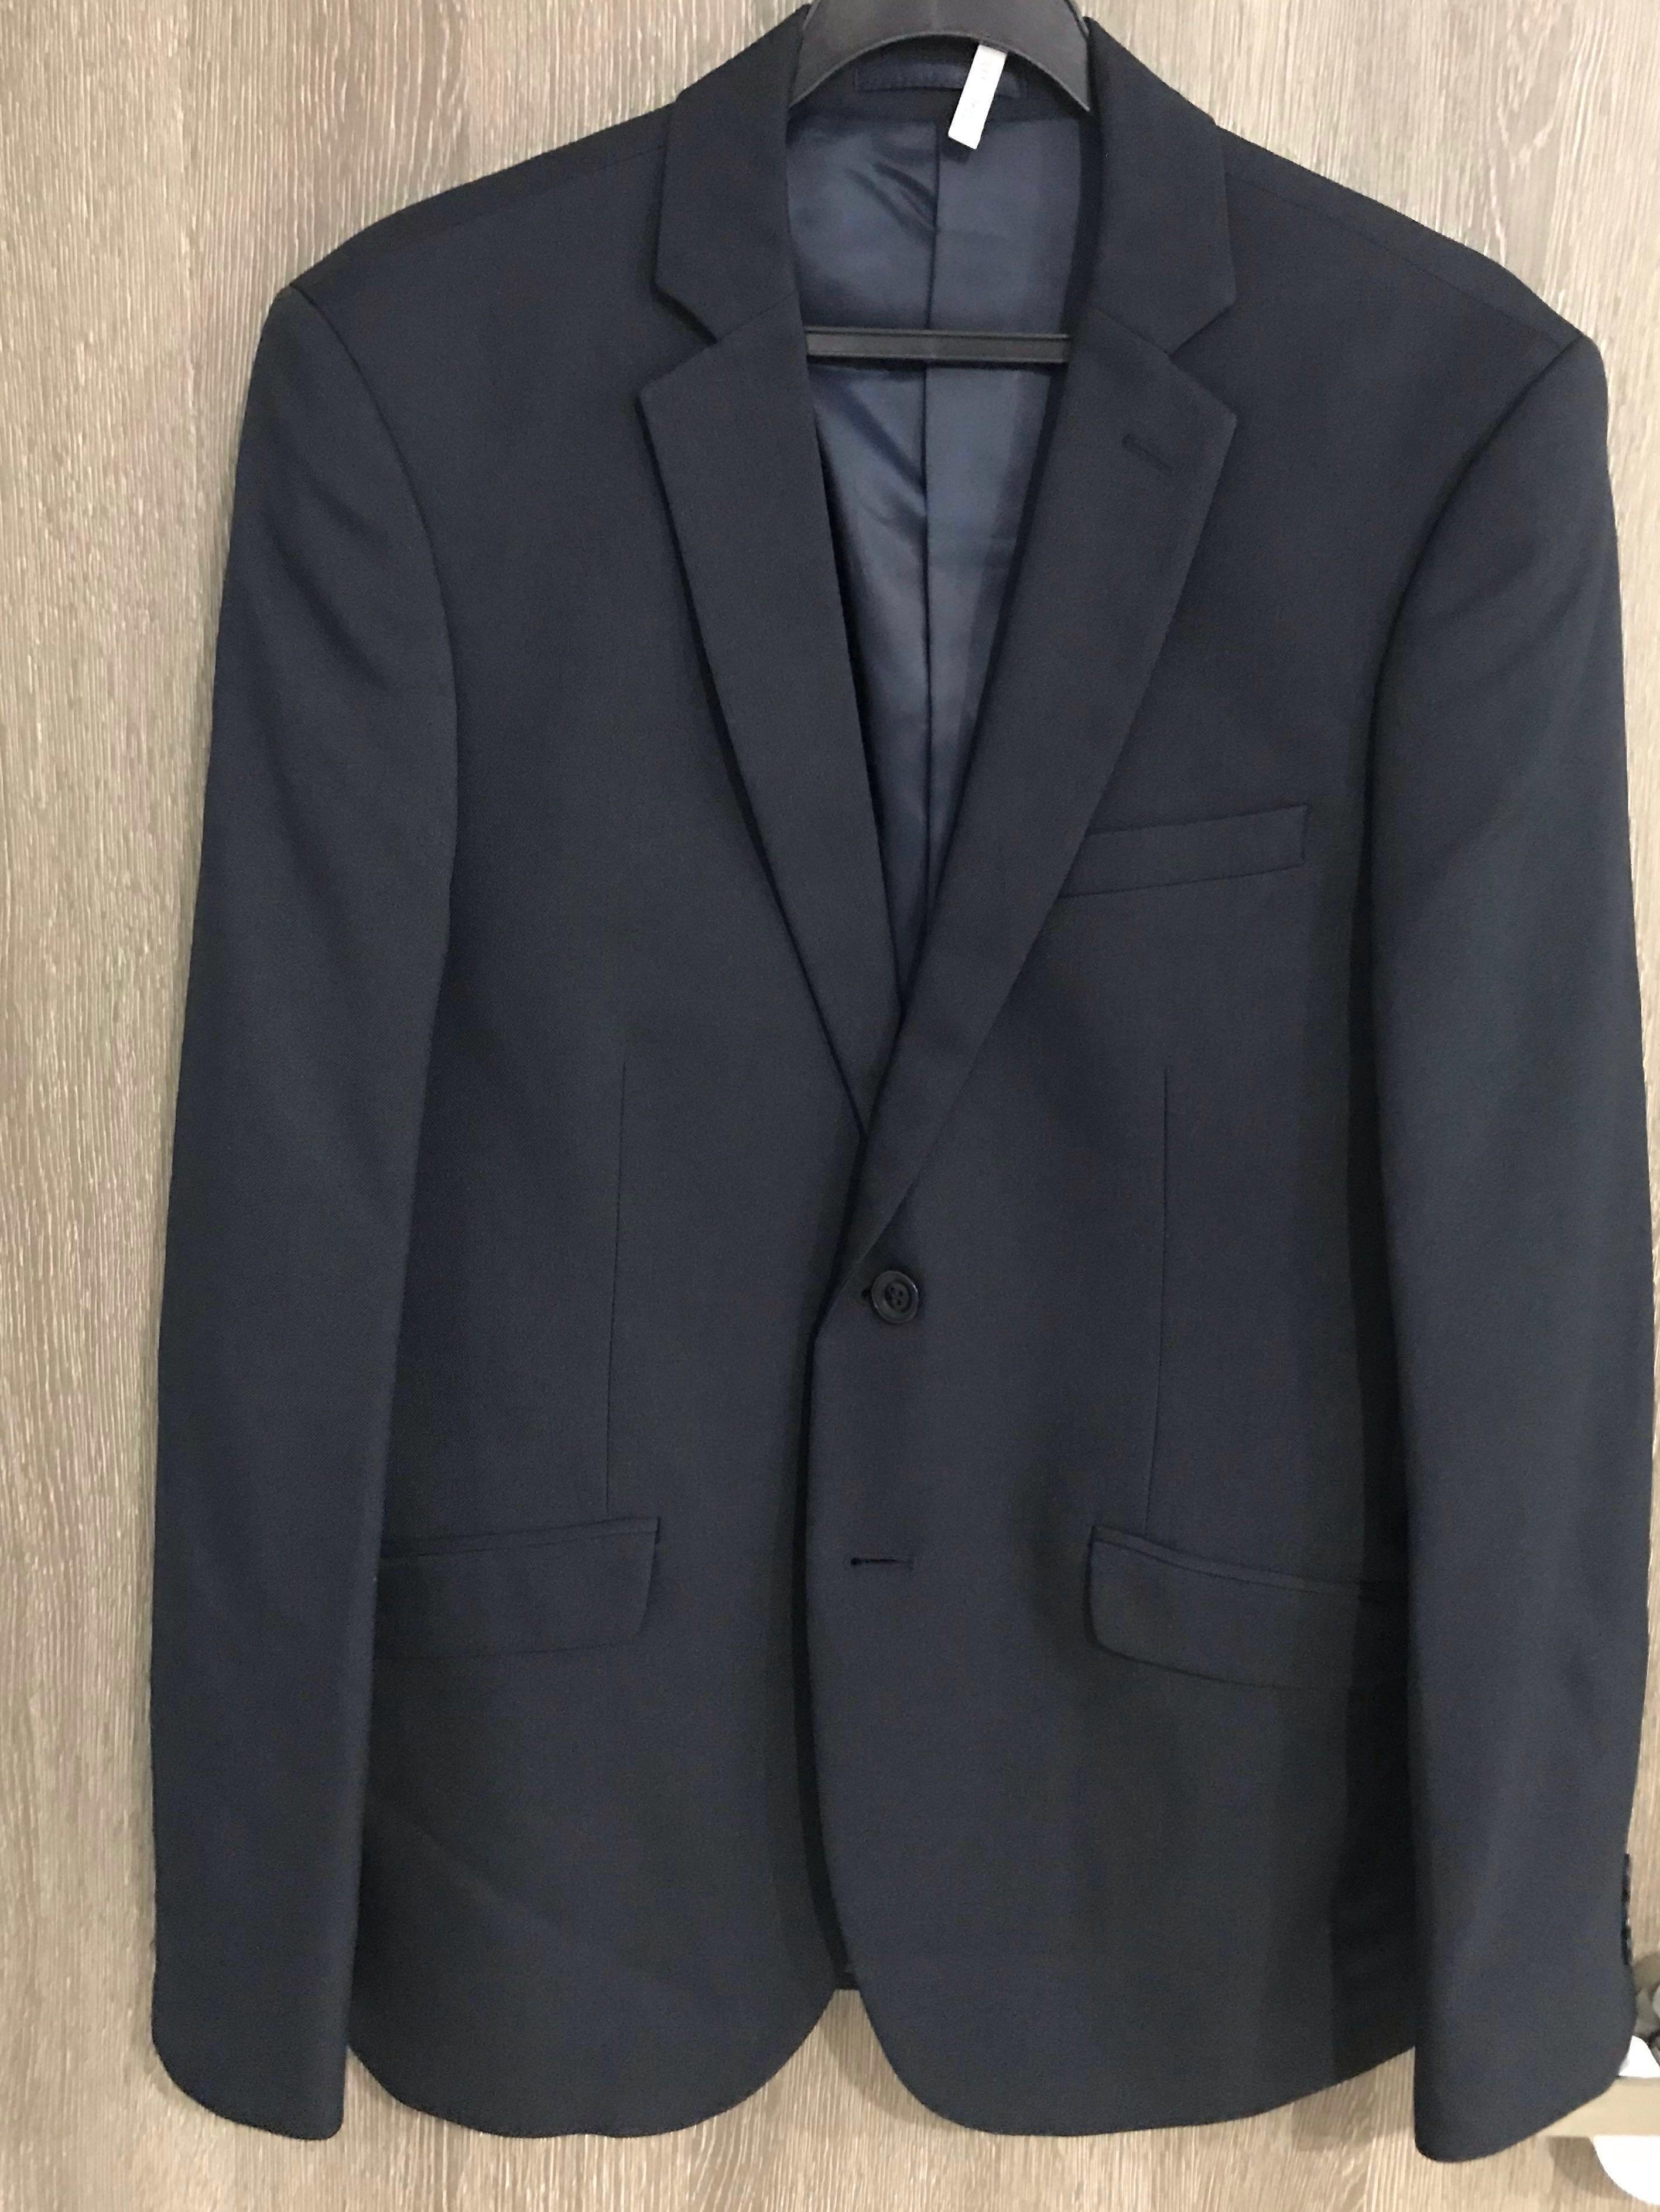 G2000 Navy Blue Blazer Suit with Pants, Men's Fashion, Clothes, Others ...